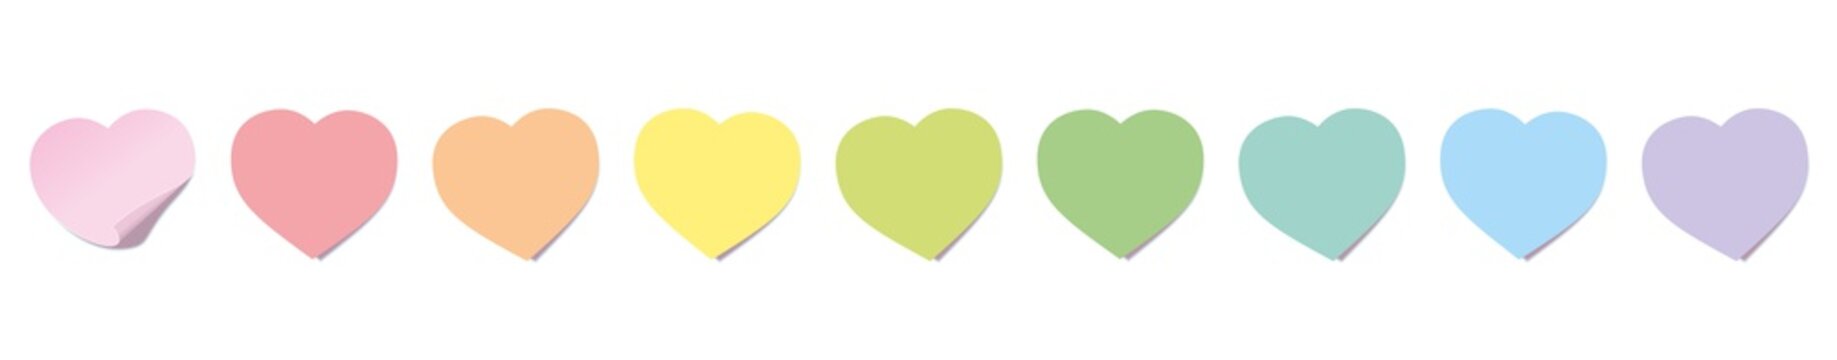 Sticky notes, heart shaped, rainbow colored line. Isolated vector illustration on white background.